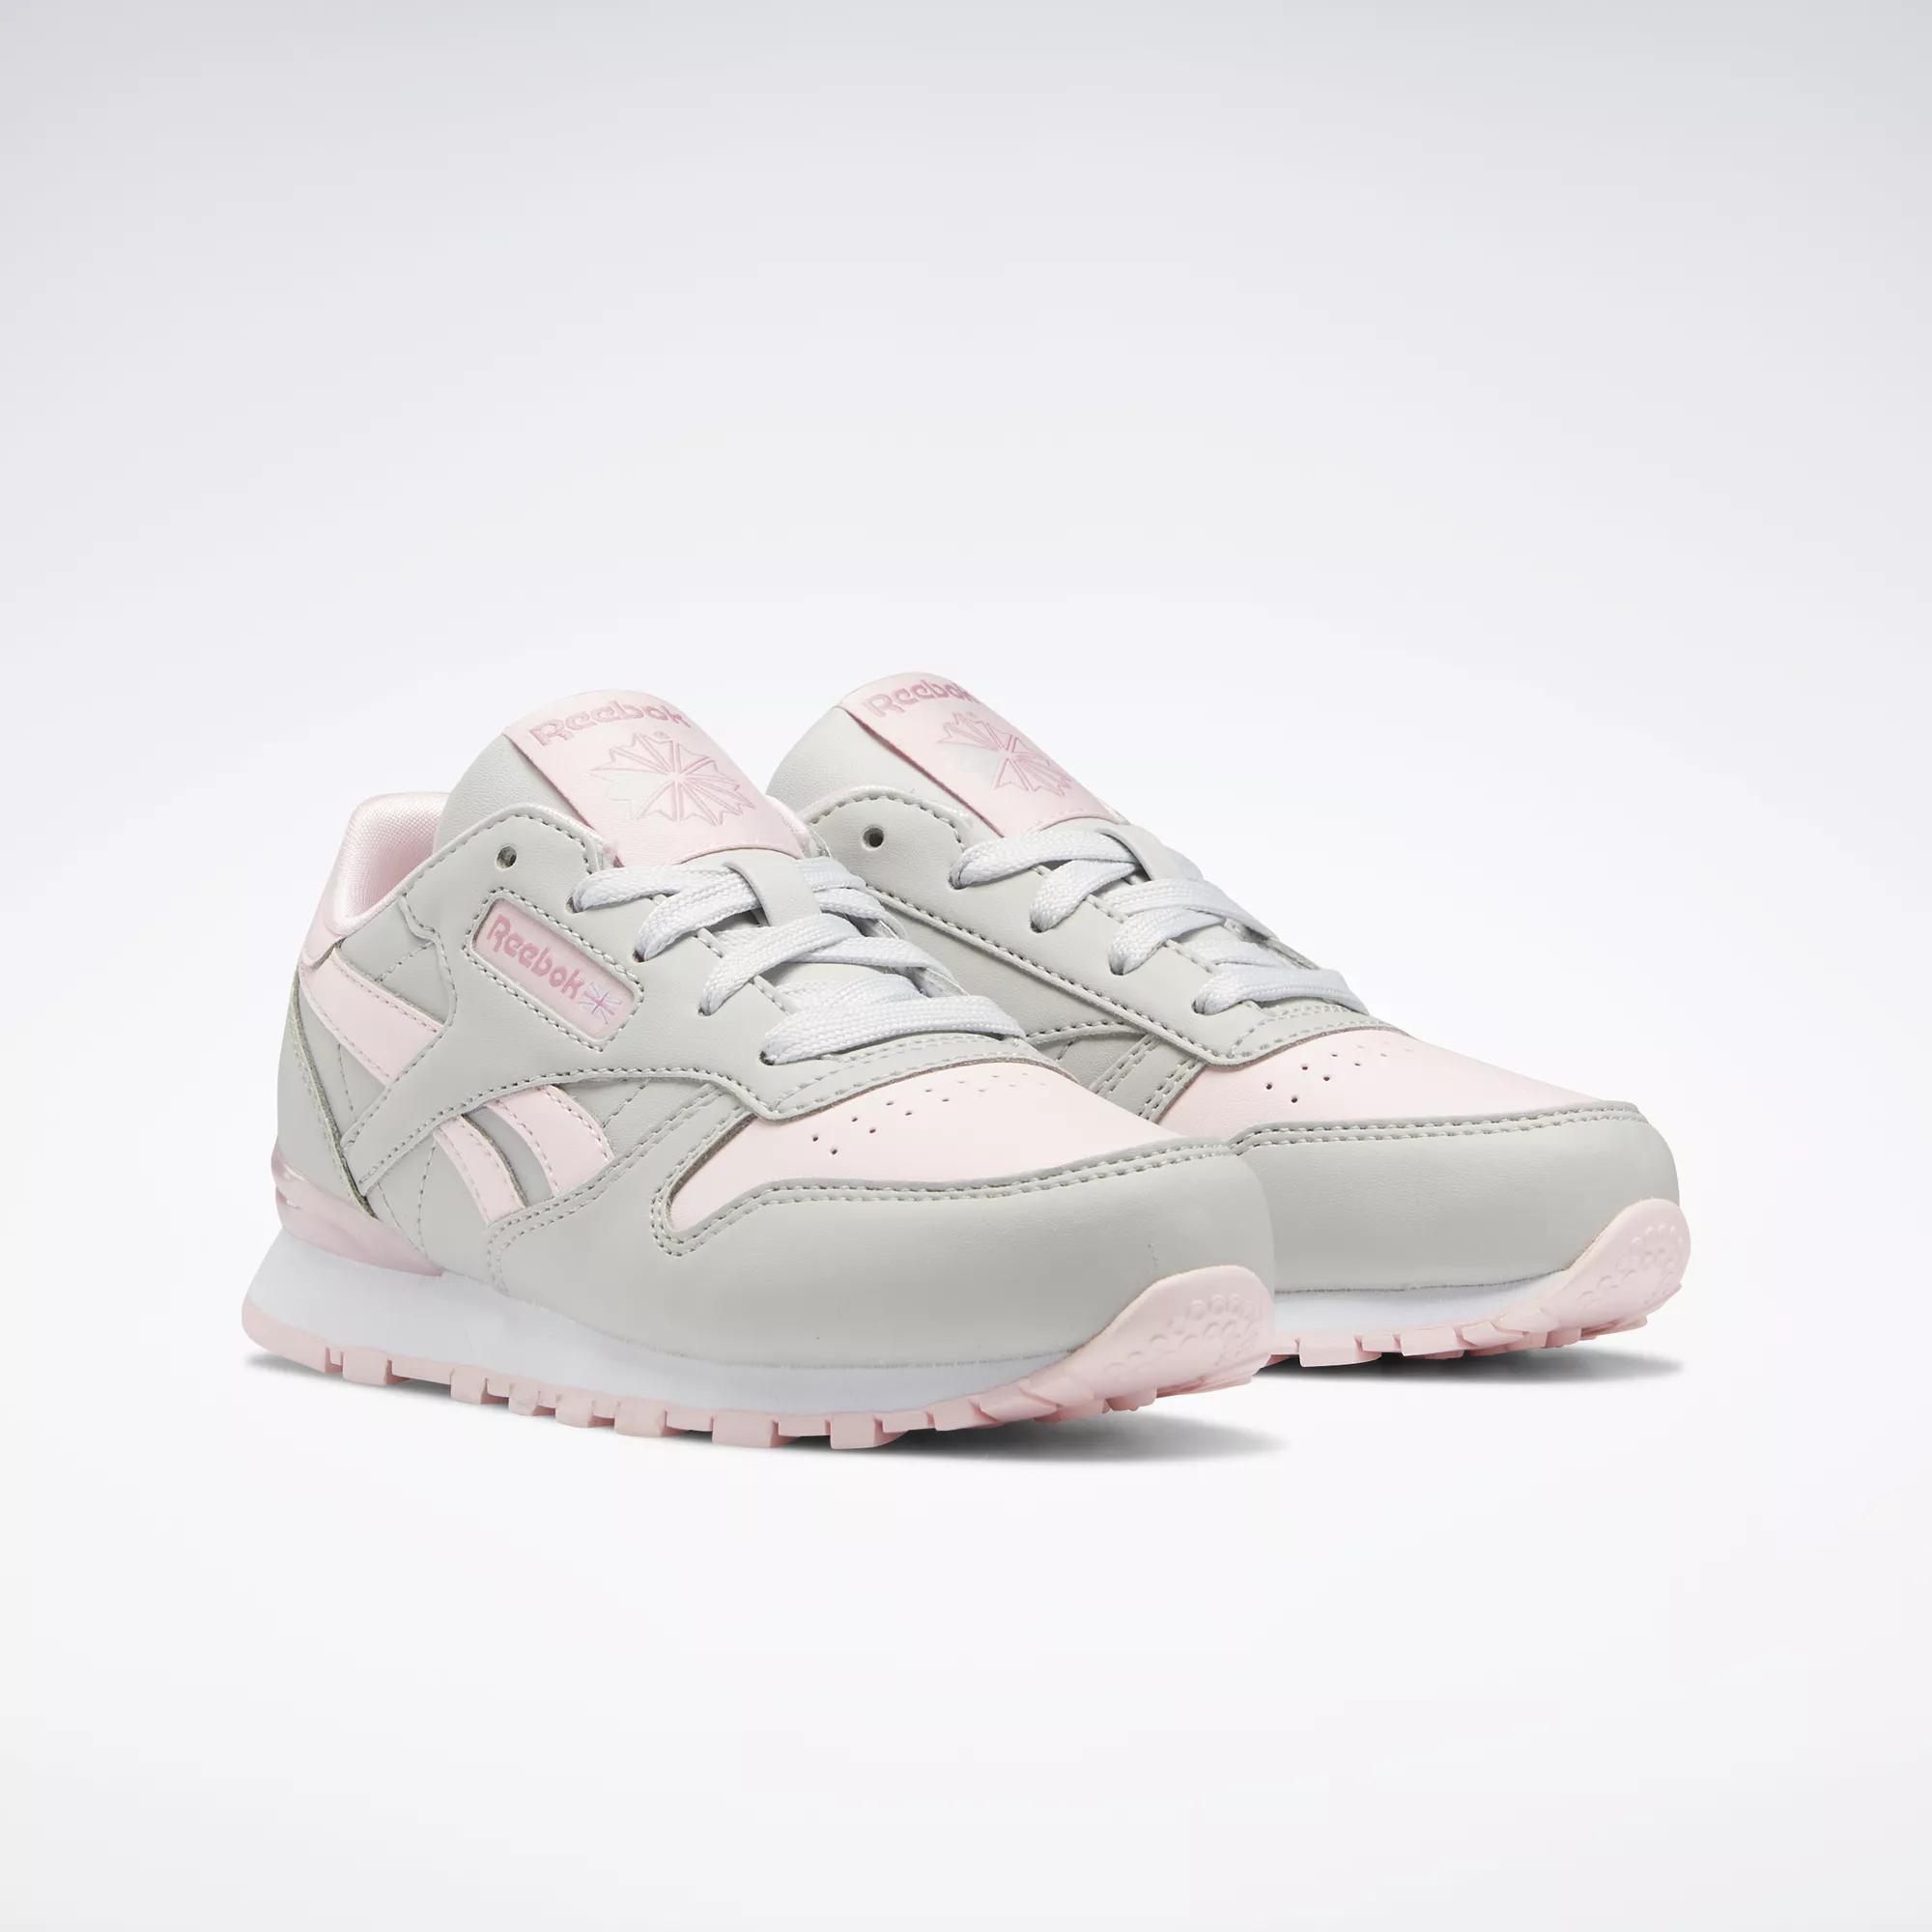 Classic Leather Step 'n' Flash - - Pure Grey 2 / Pure Grey 2 / Porcelain Pink | Reebok